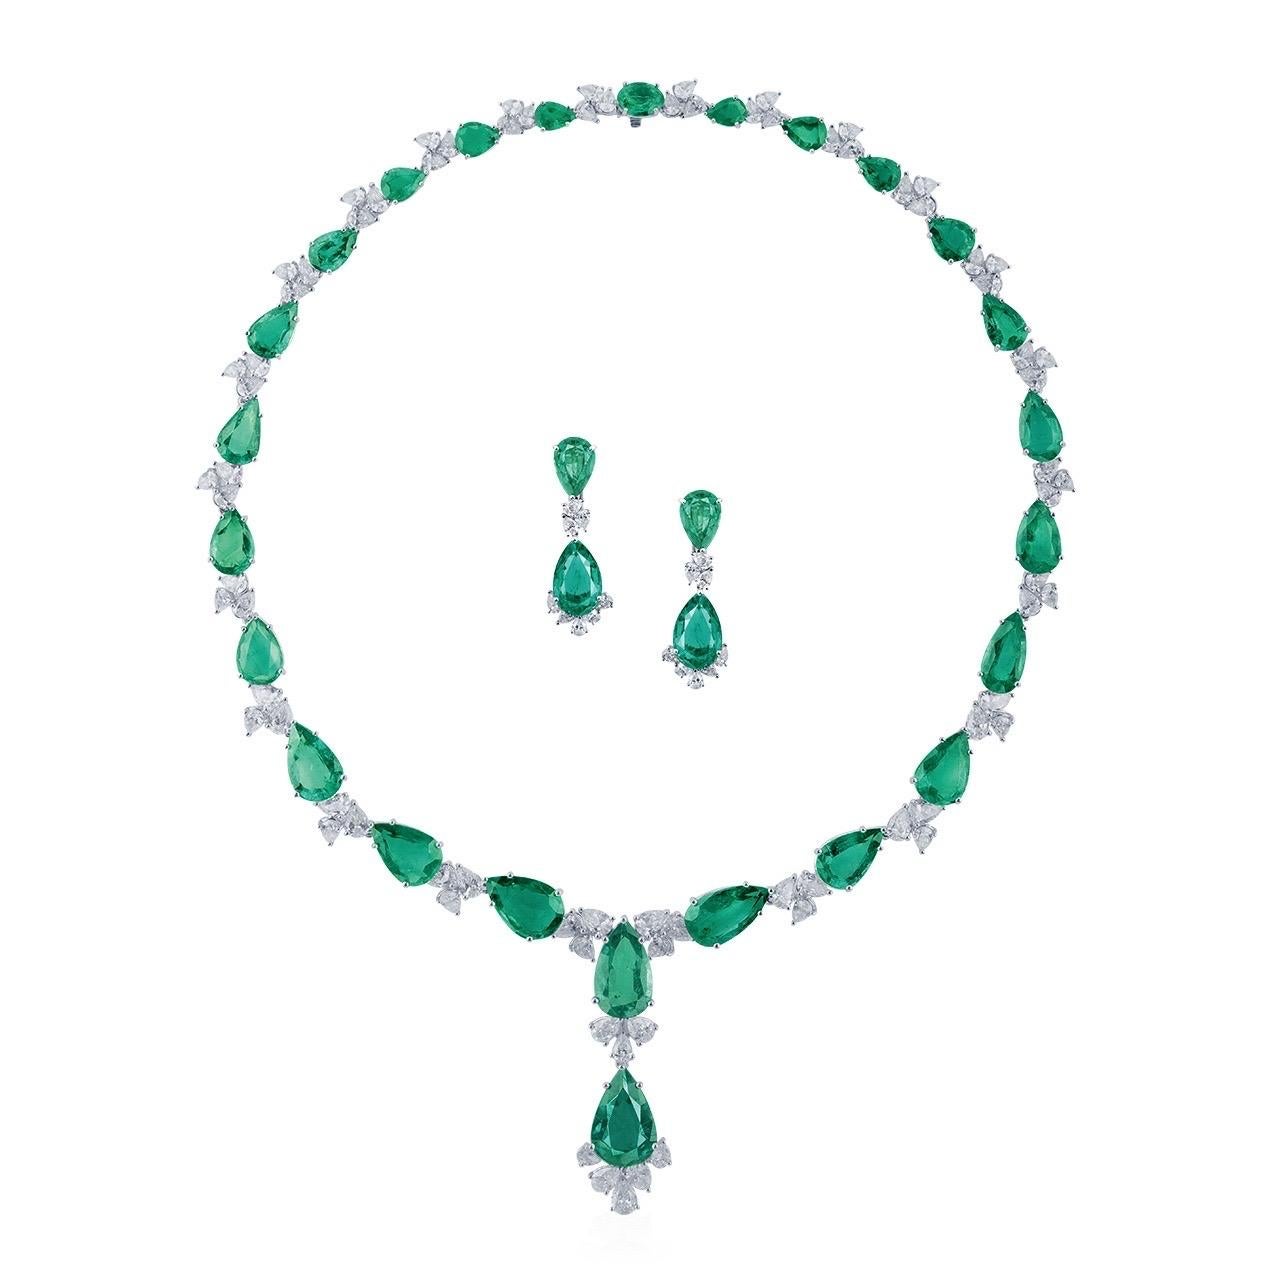 Pear Cut Emilio Jewelry Certified Natural Zambian Emerald Necklace And Earrings For Sale